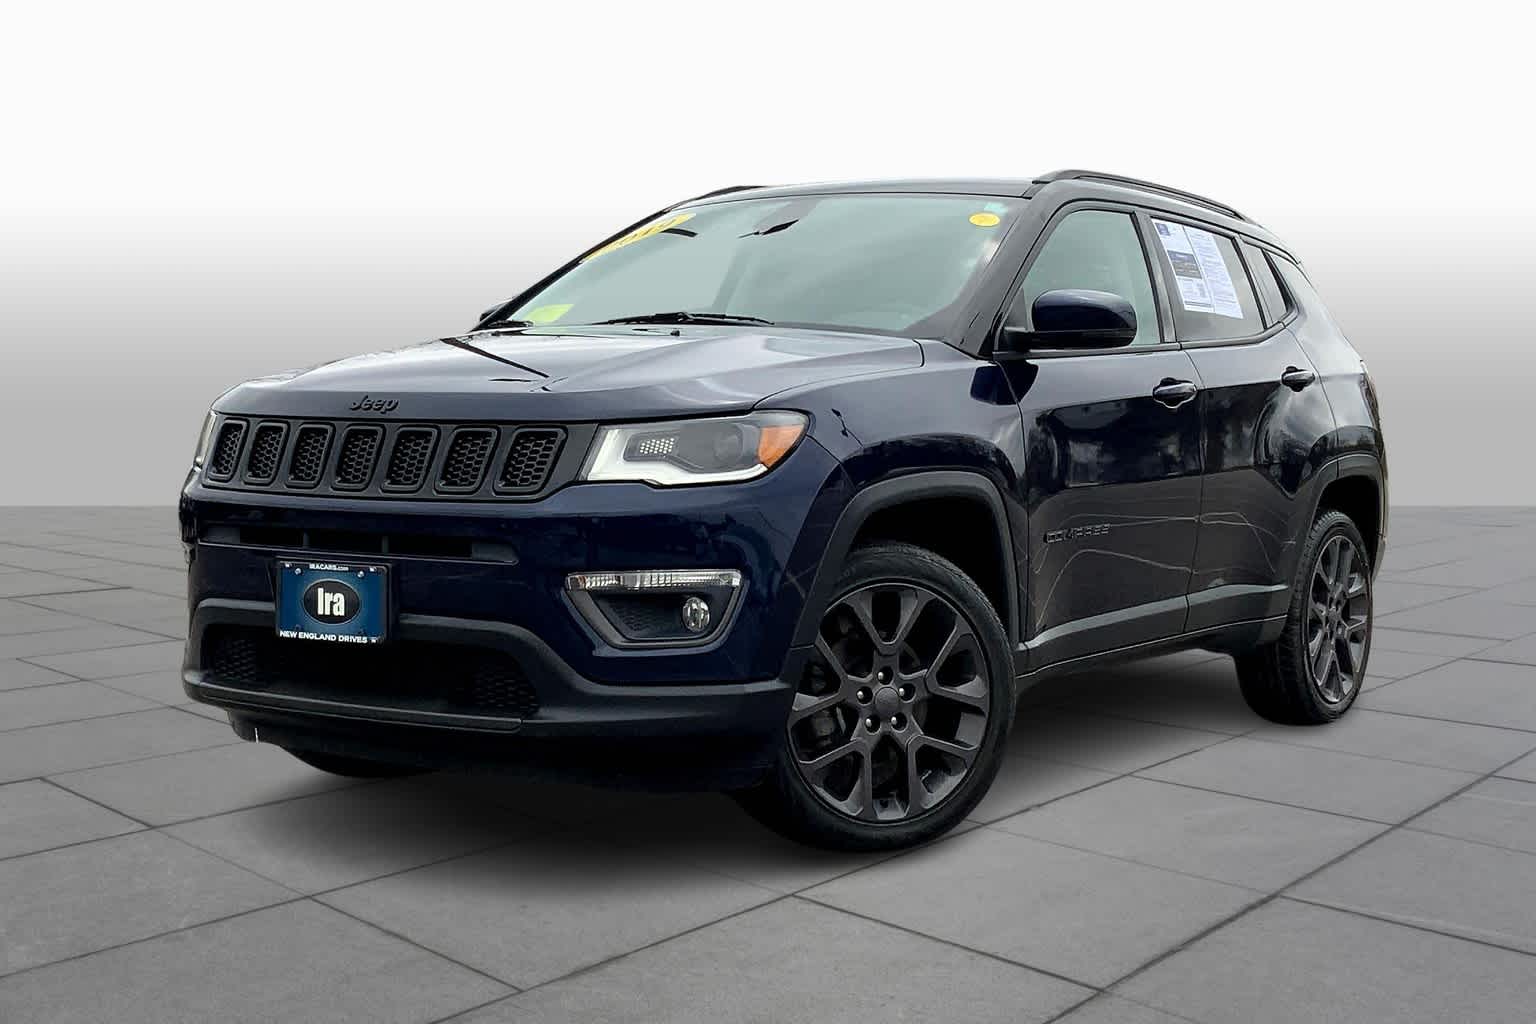 2019 Jeep Compass High Altitude 4WD